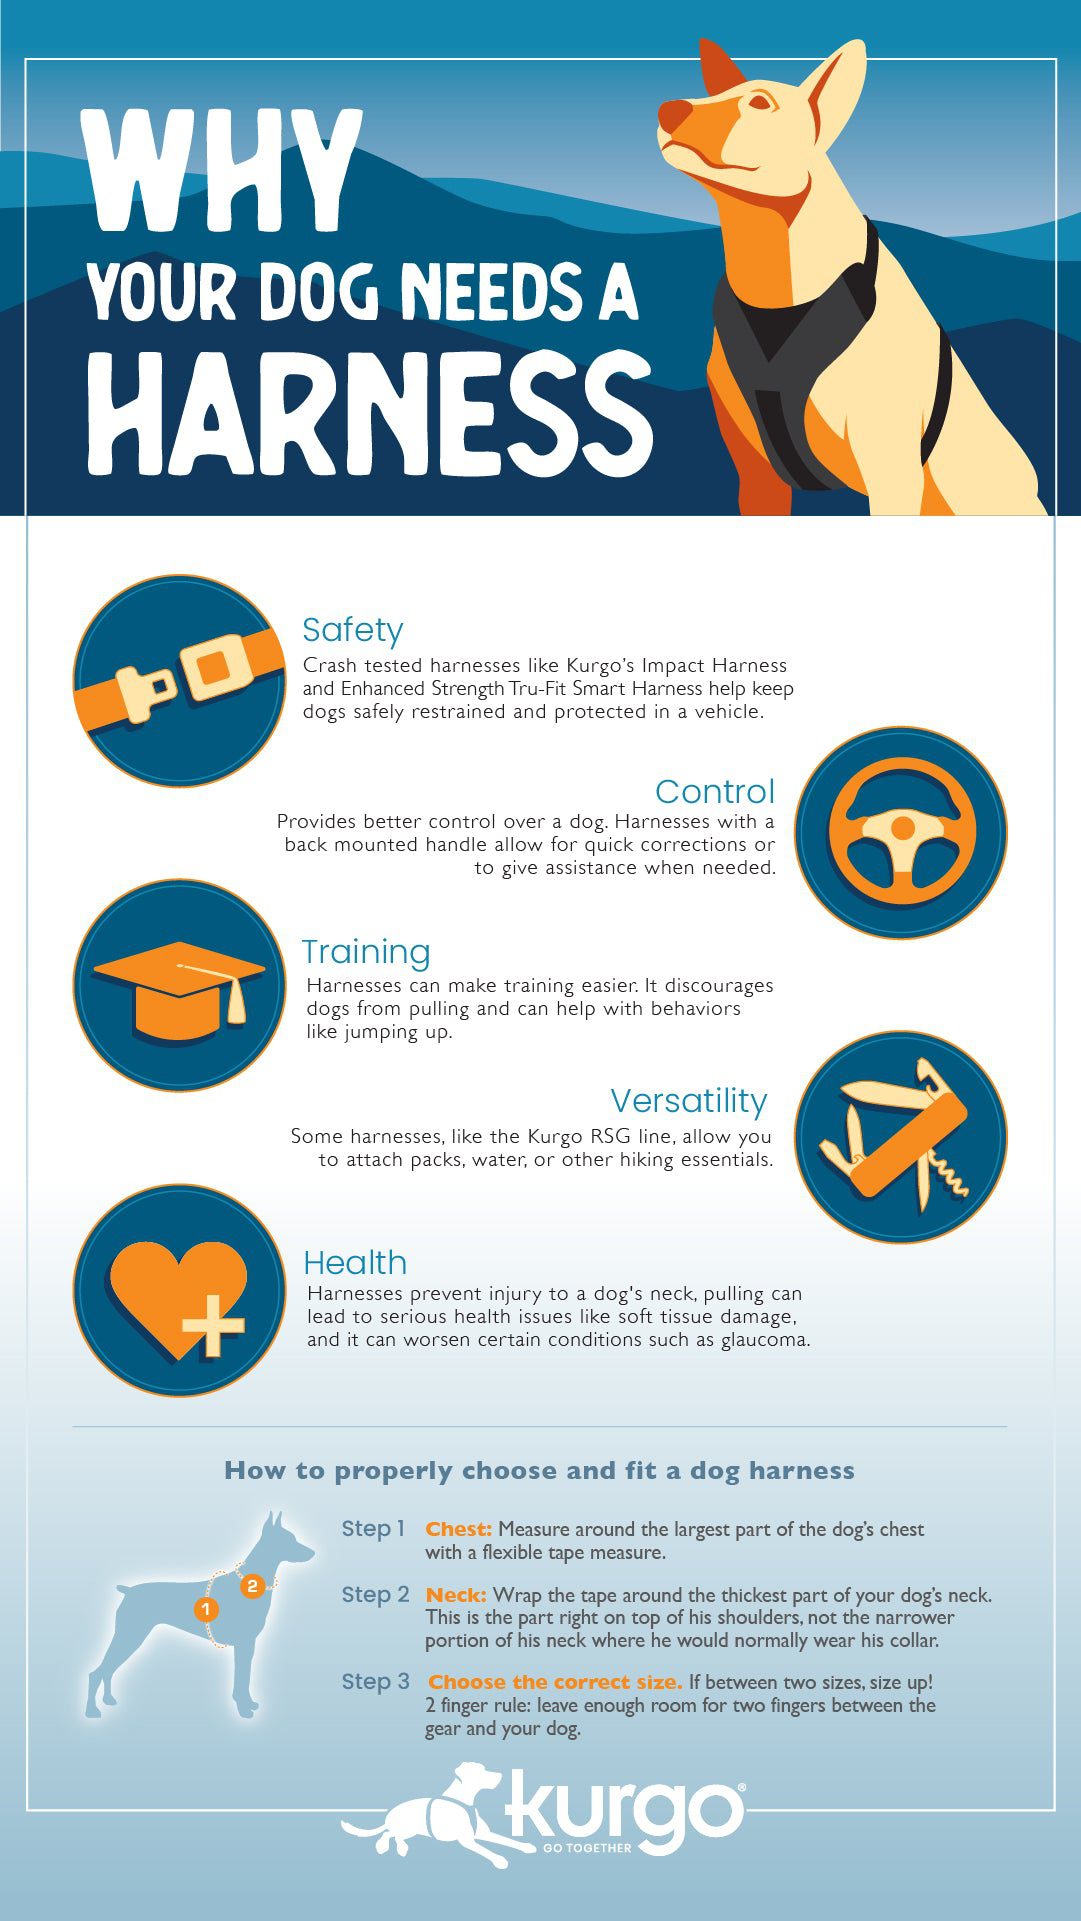 5 Reasons Why Dog Harnesses are Better Than Dog Collars